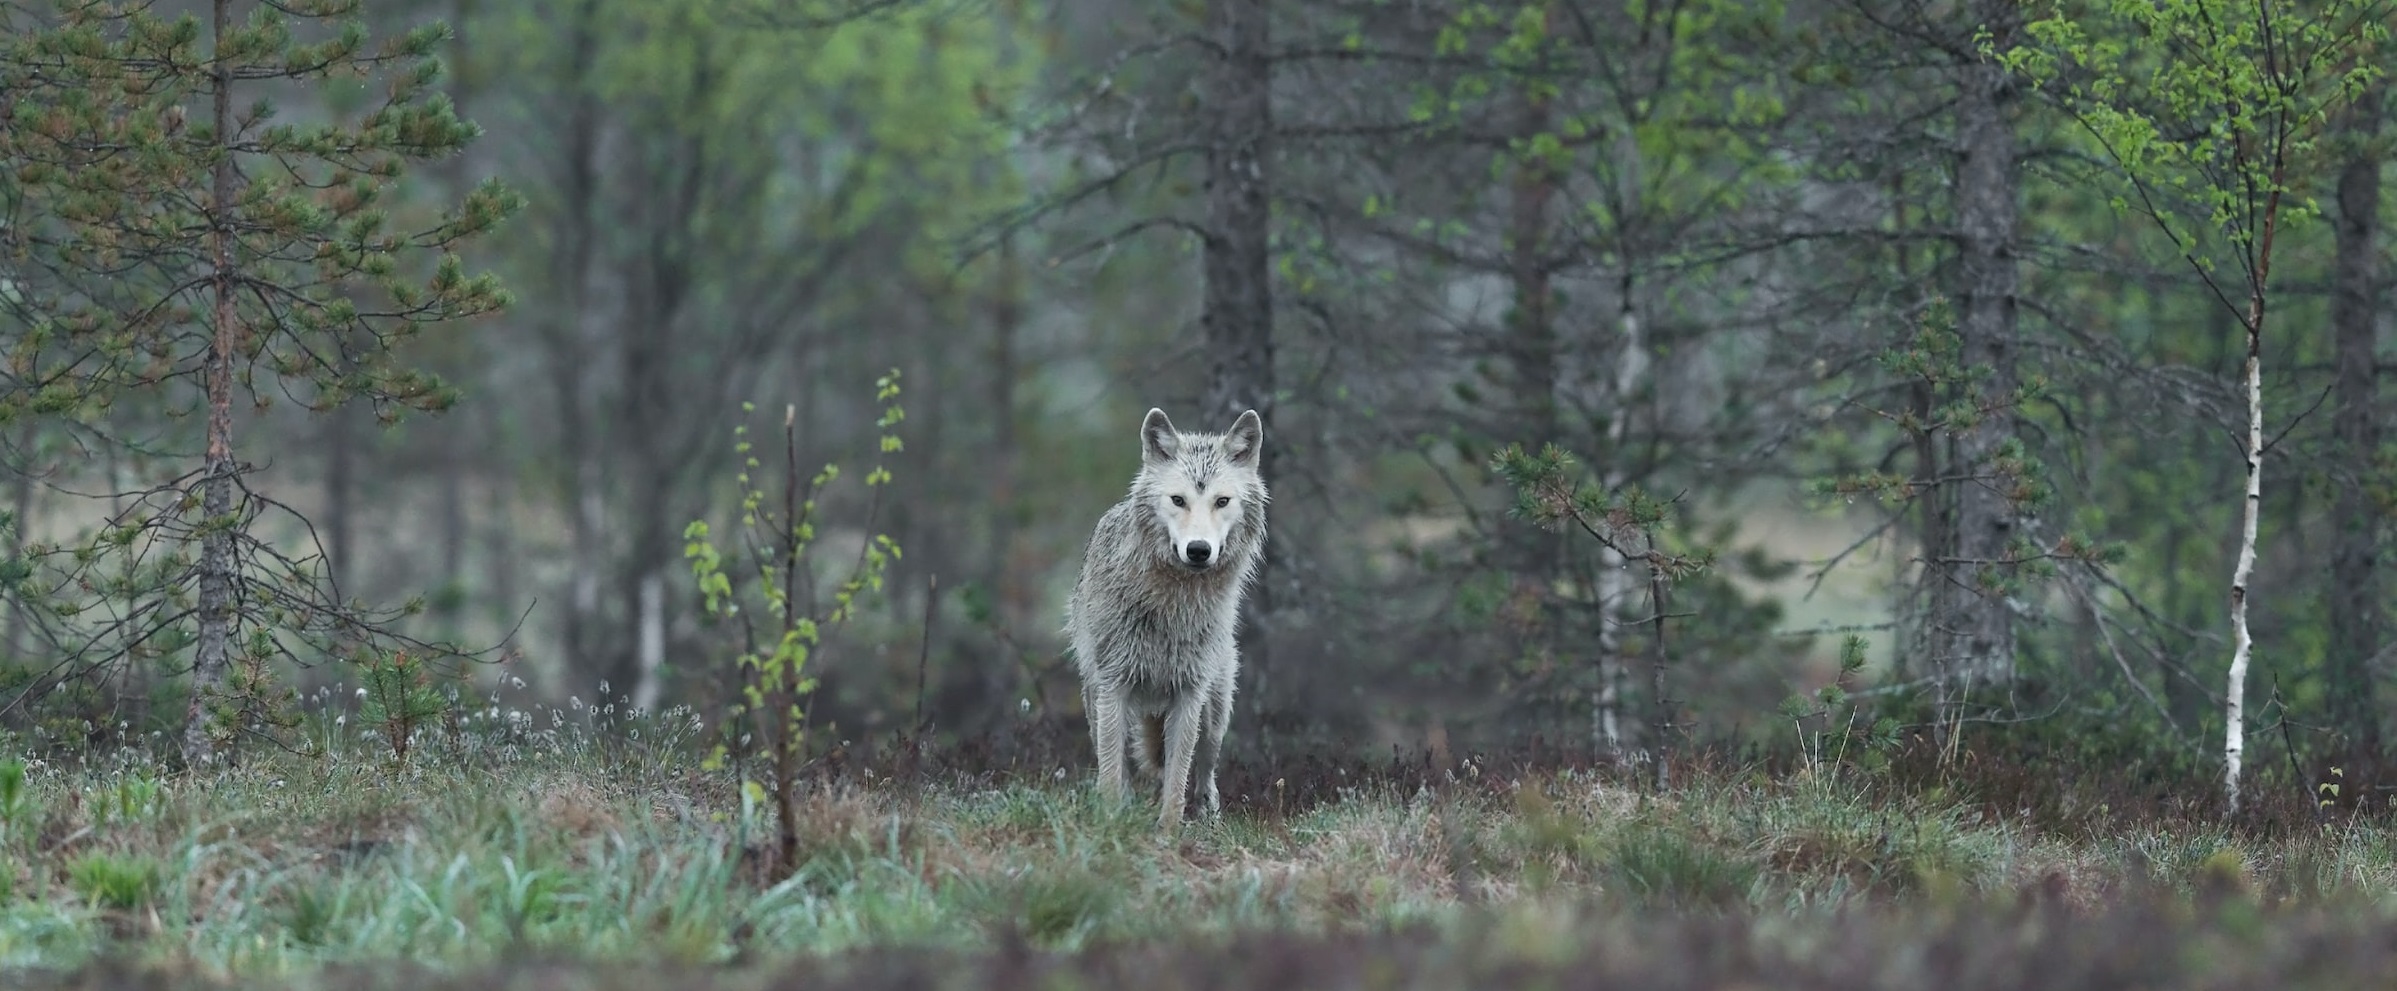 Image shows wolf in forest